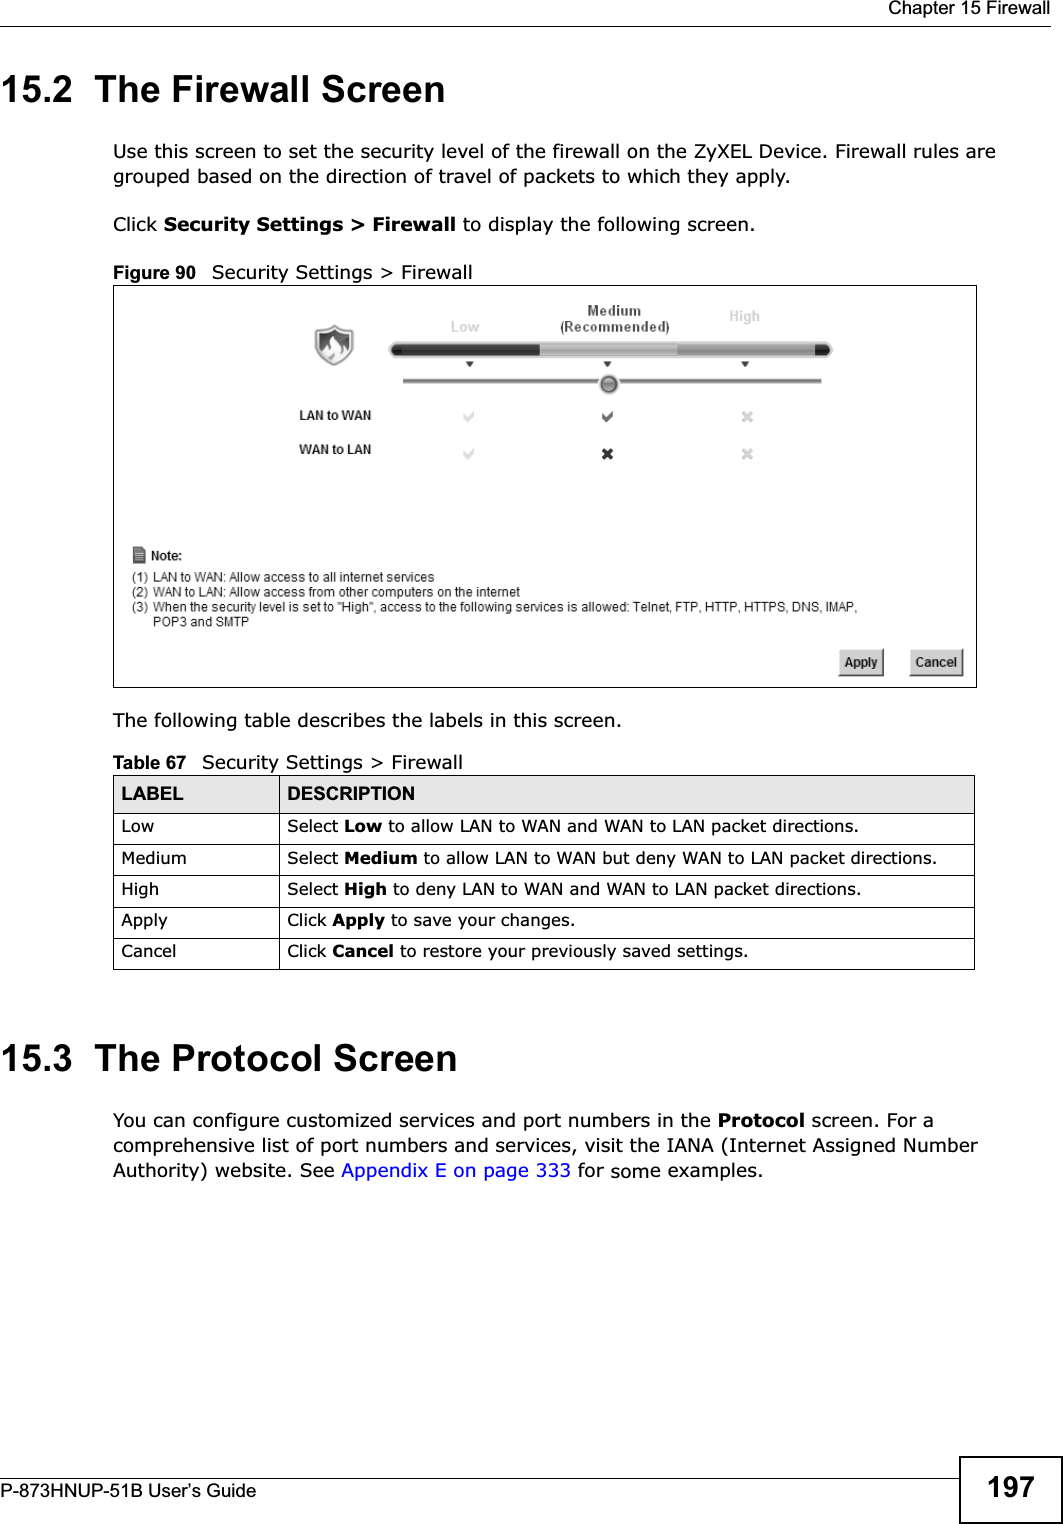  Chapter 15 FirewallP-873HNUP-51B User’s Guide 19715.2  The Firewall ScreenUse this screen to set the security level of the firewall on the ZyXEL Device. Firewall rules are grouped based on the direction of travel of packets to which they apply. Click Security Settings &gt; Firewall to display the following screen. Figure 90   Security Settings &gt; FirewallThe following table describes the labels in this screen.15.3  The Protocol Screen You can configure customized services and port numbers in the Protocol screen. For a comprehensive list of port numbers and services, visit the IANA (Internet Assigned Number Authority) website. See Appendix E on page 333 for some examples. Table 67   Security Settings &gt; FirewallLABEL DESCRIPTIONLow Select Low to allow LAN to WAN and WAN to LAN packet directions.Medium Select Medium to allow LAN to WAN but deny WAN to LAN packet directions.High Select High to deny LAN to WAN and WAN to LAN packet directions.Apply Click Apply to save your changes.Cancel Click Cancel to restore your previously saved settings.